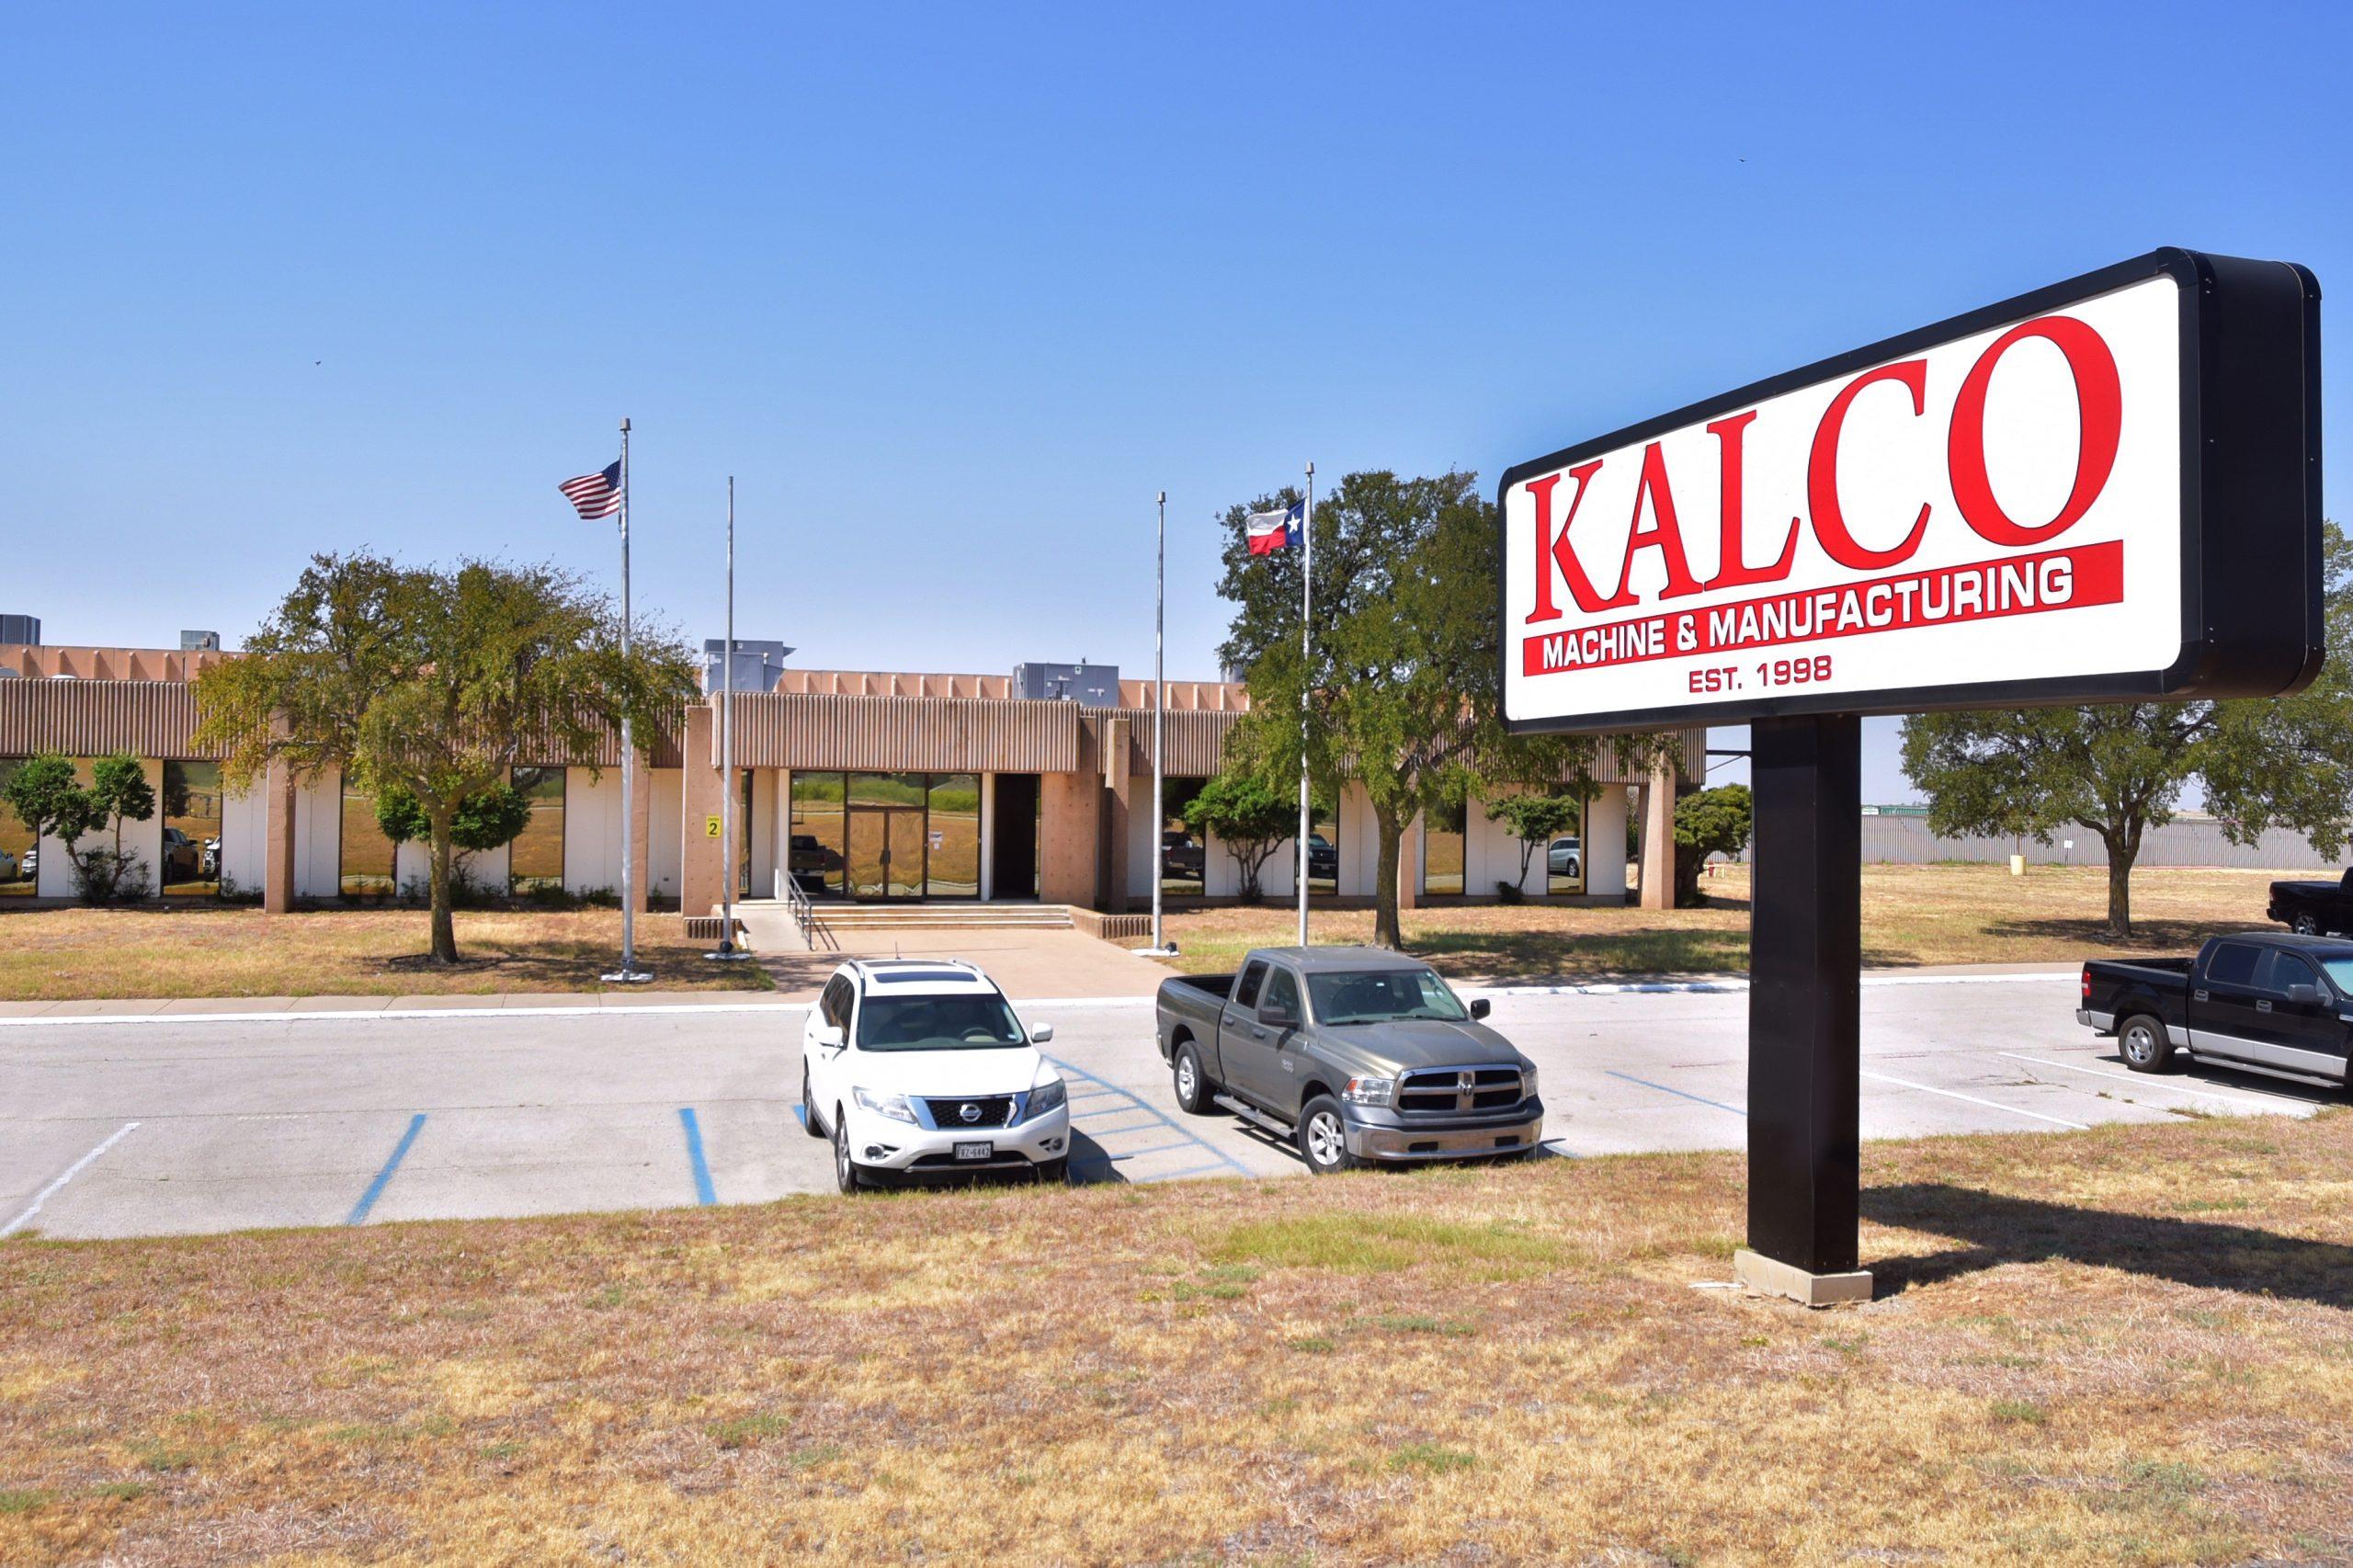 KALCO building exterior and signage